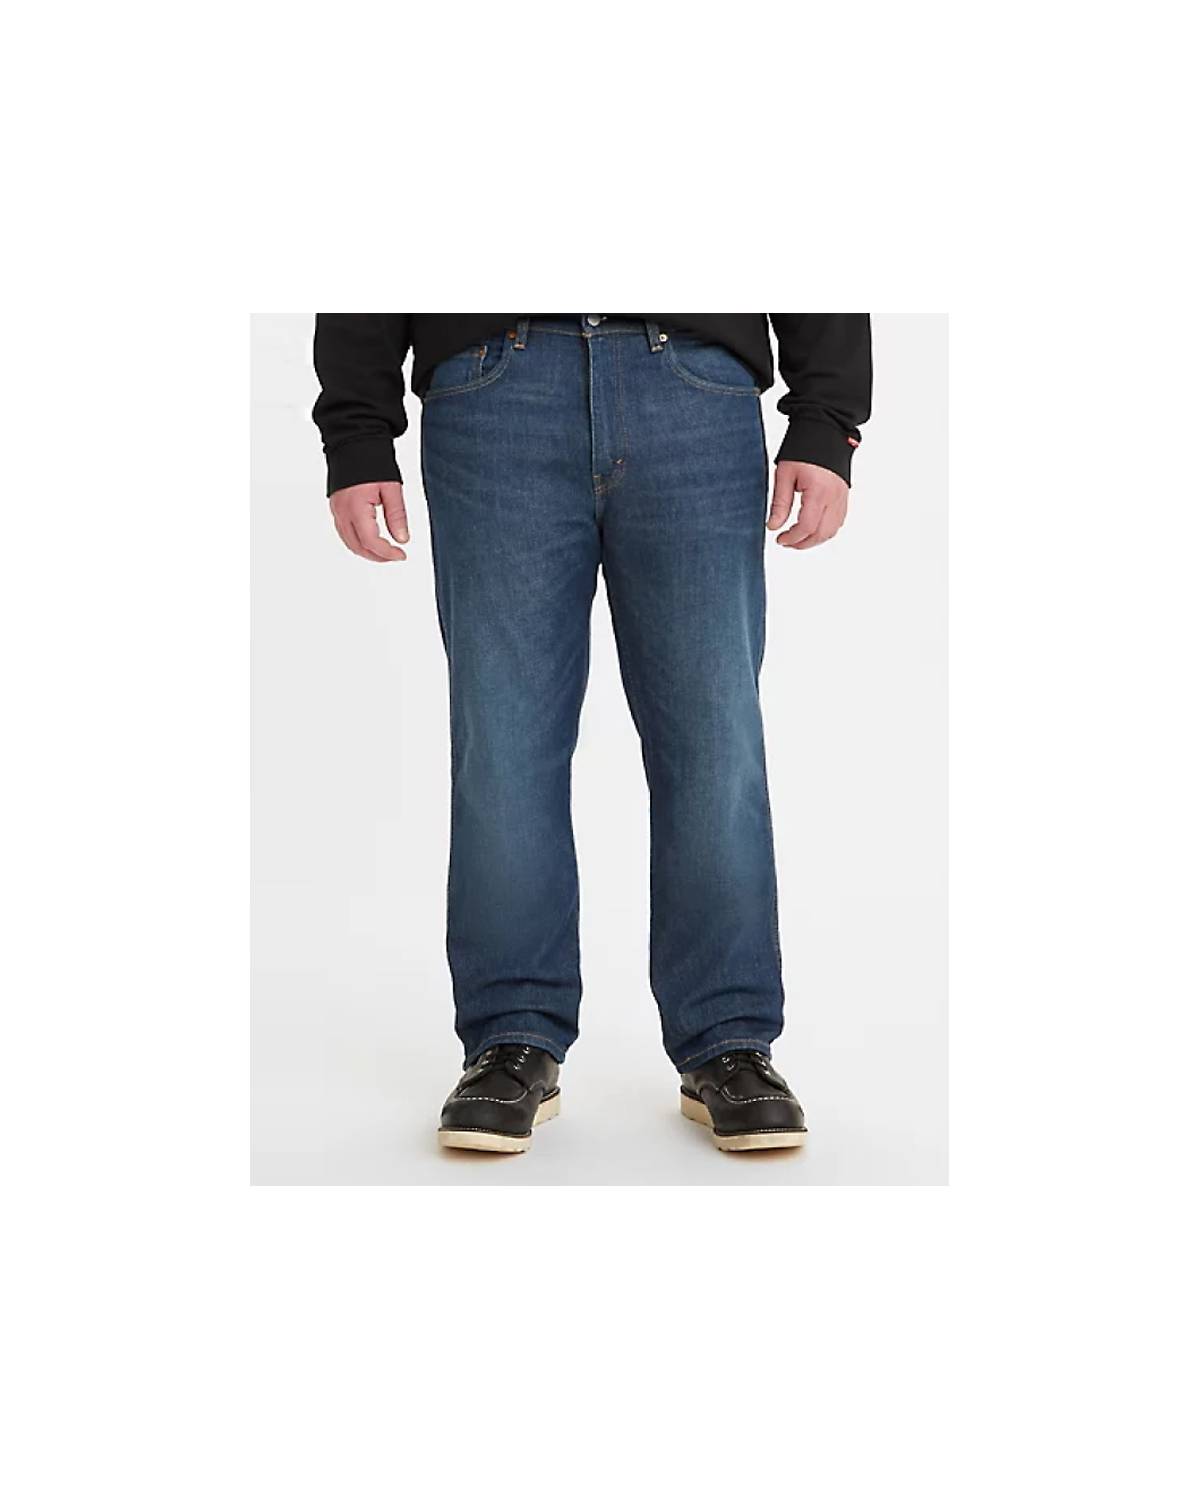 Man in bootcut jeans